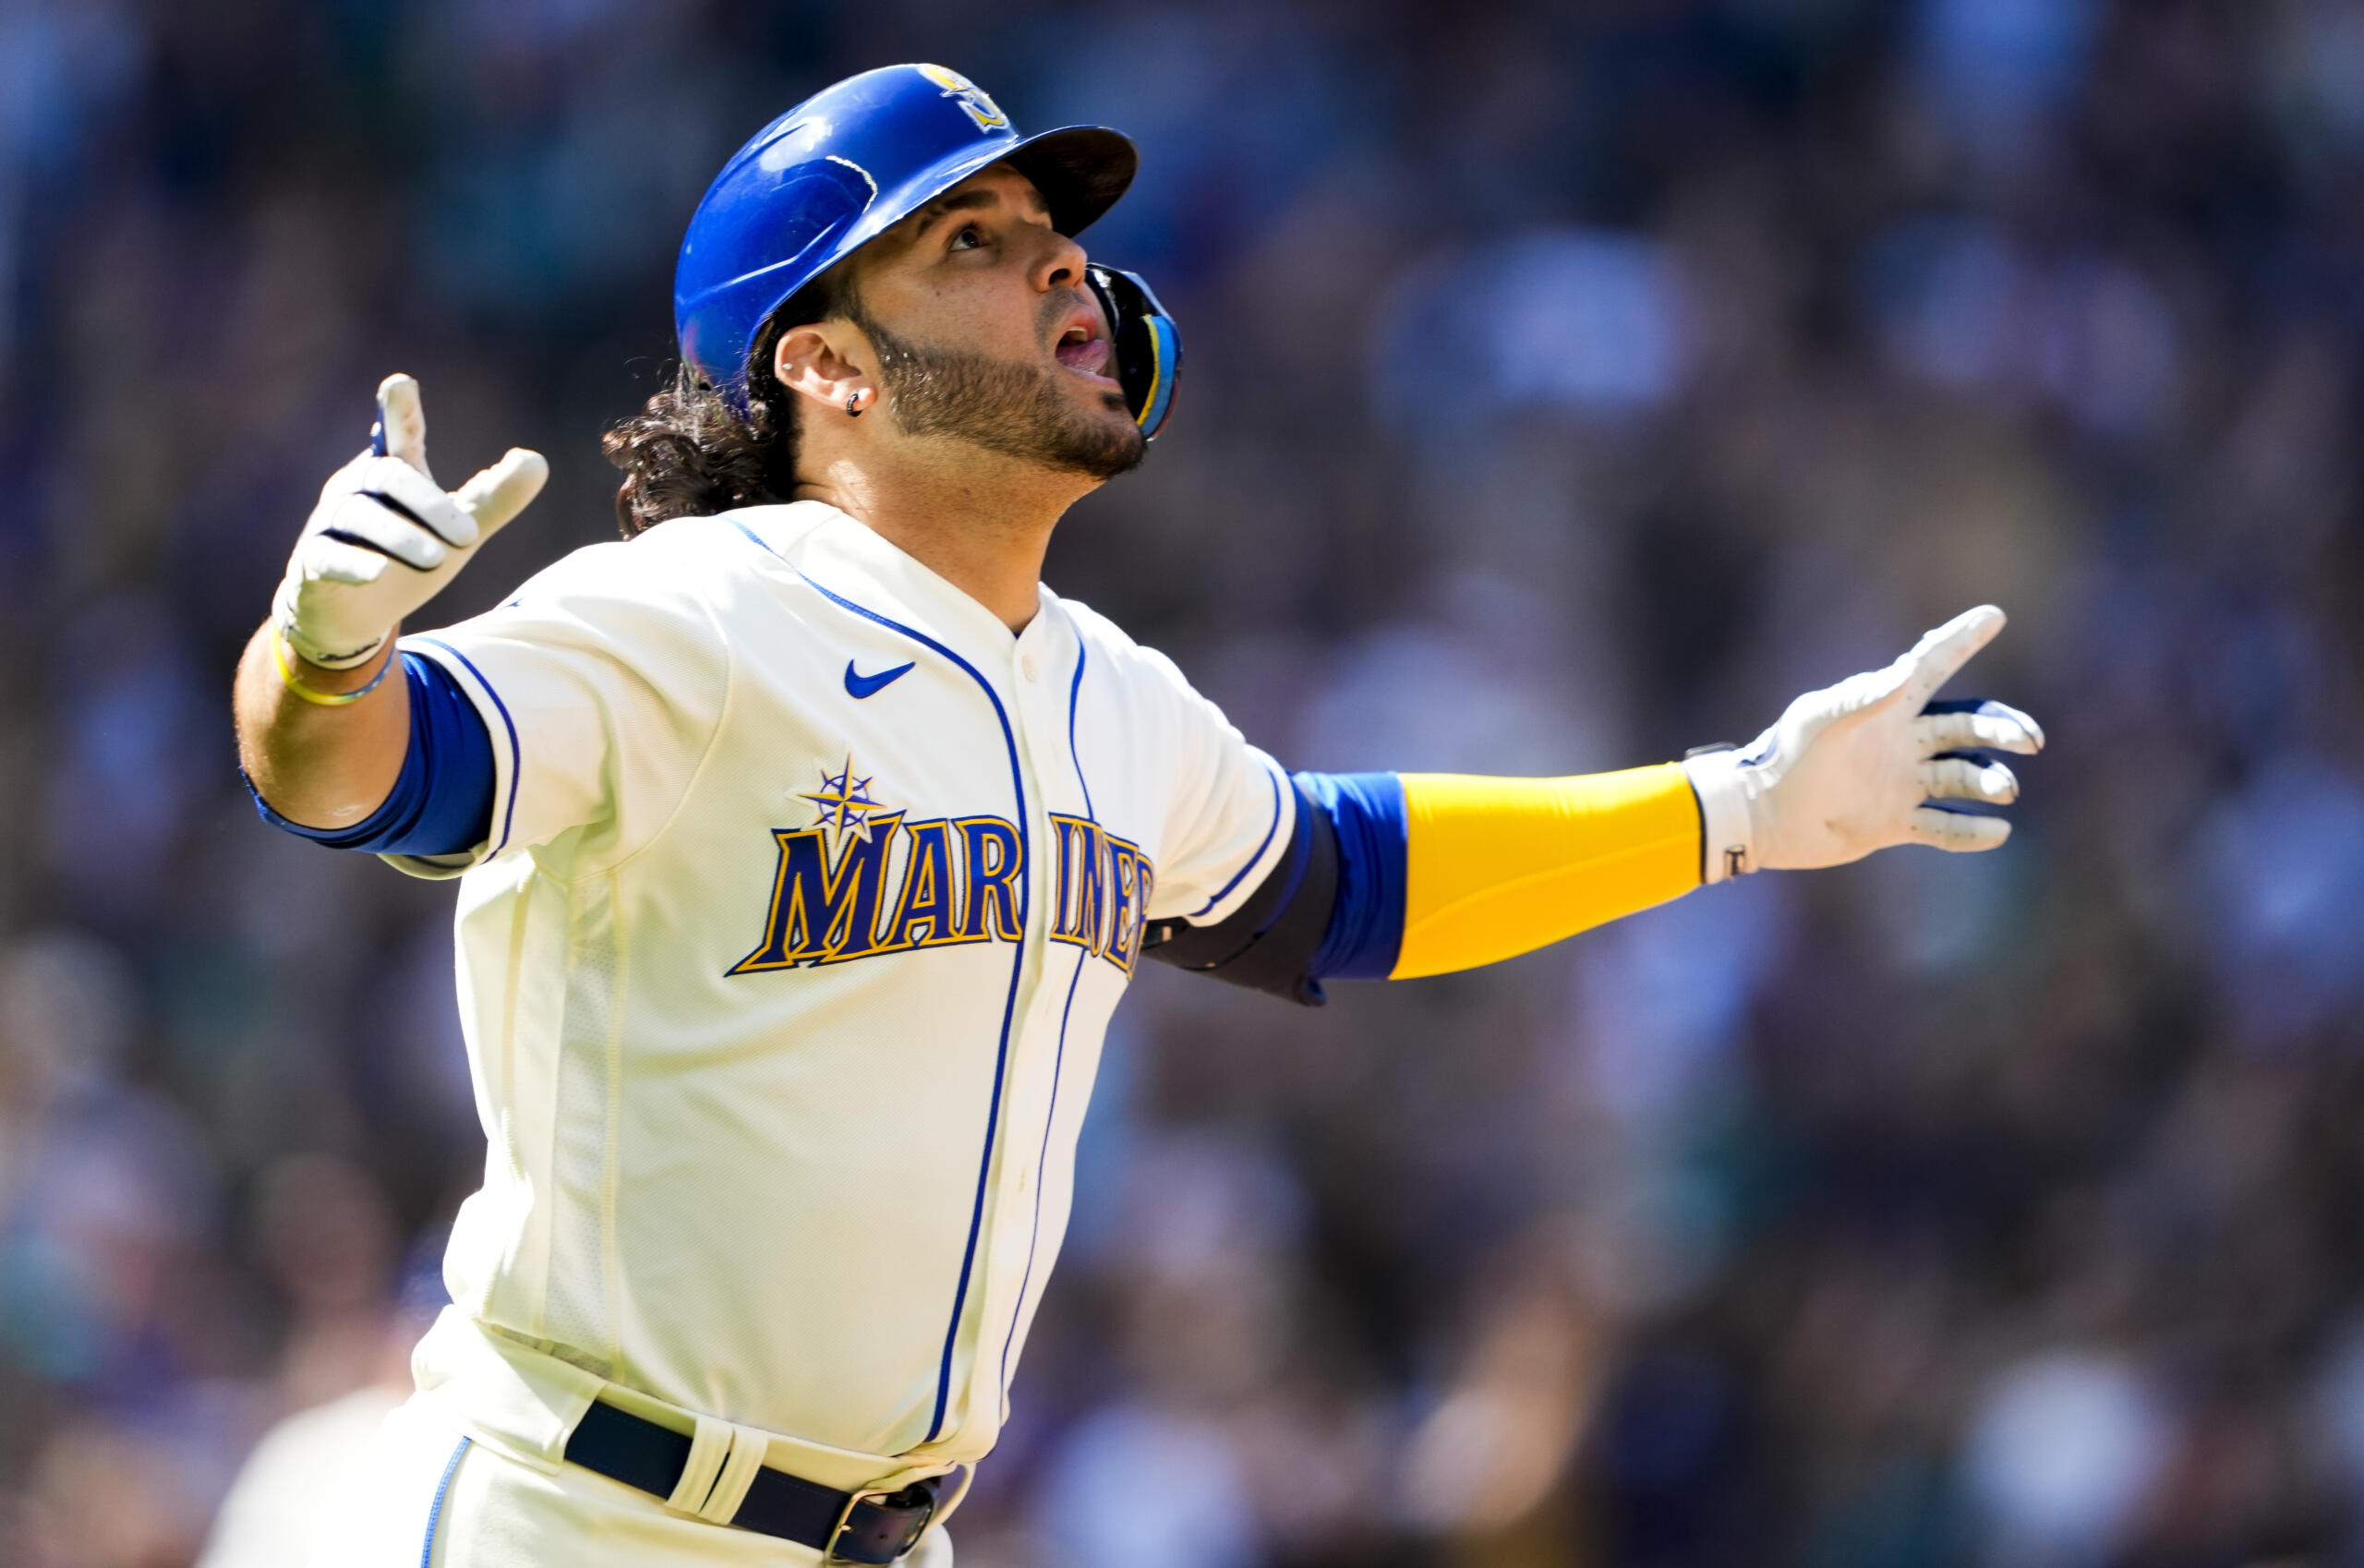 Seattle Mariners' Eugenio Suarez reacts as he runs the bases after hitting a three-run walk-off home run to win the game against the Pittsburgh Pirates during the tenth inning of a baseball game, Sunday, May 28, 2023, in Seattle. The Mariners won 6-3.